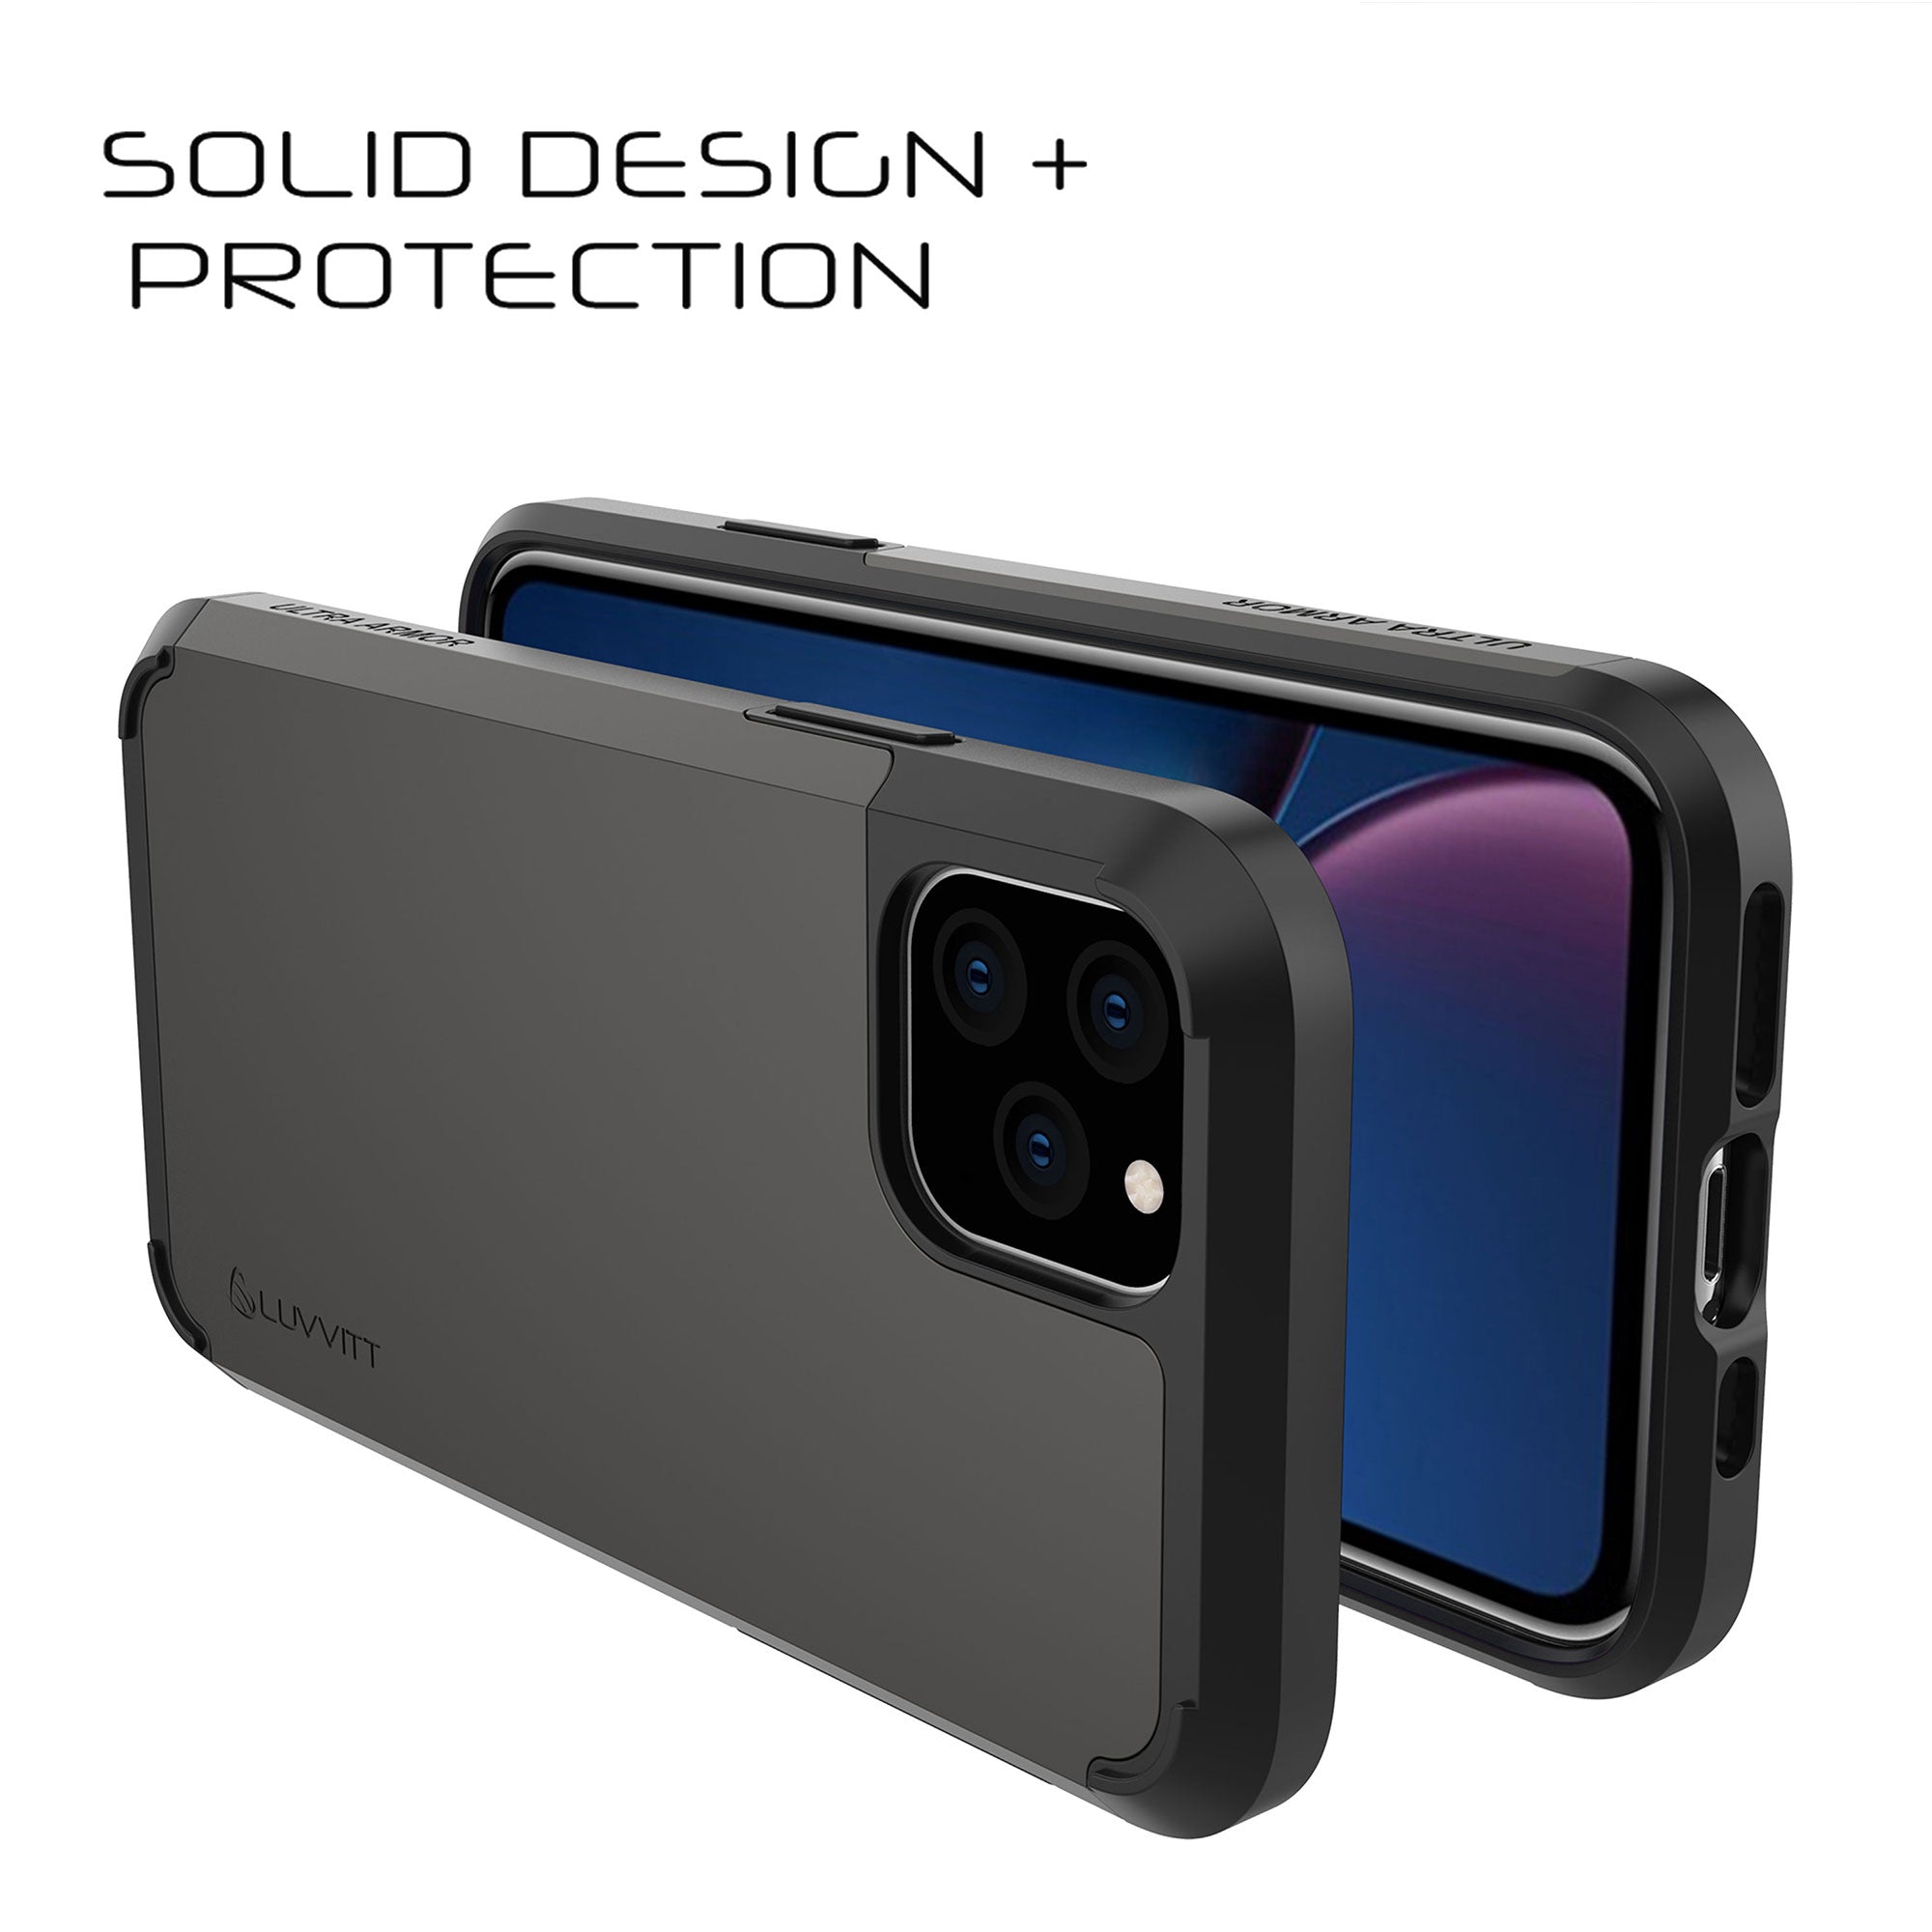 Luvvitt Ultra Armor Dual Layer Heavy Duty Case for iPhone 11 Pro 2019 - Space Gray